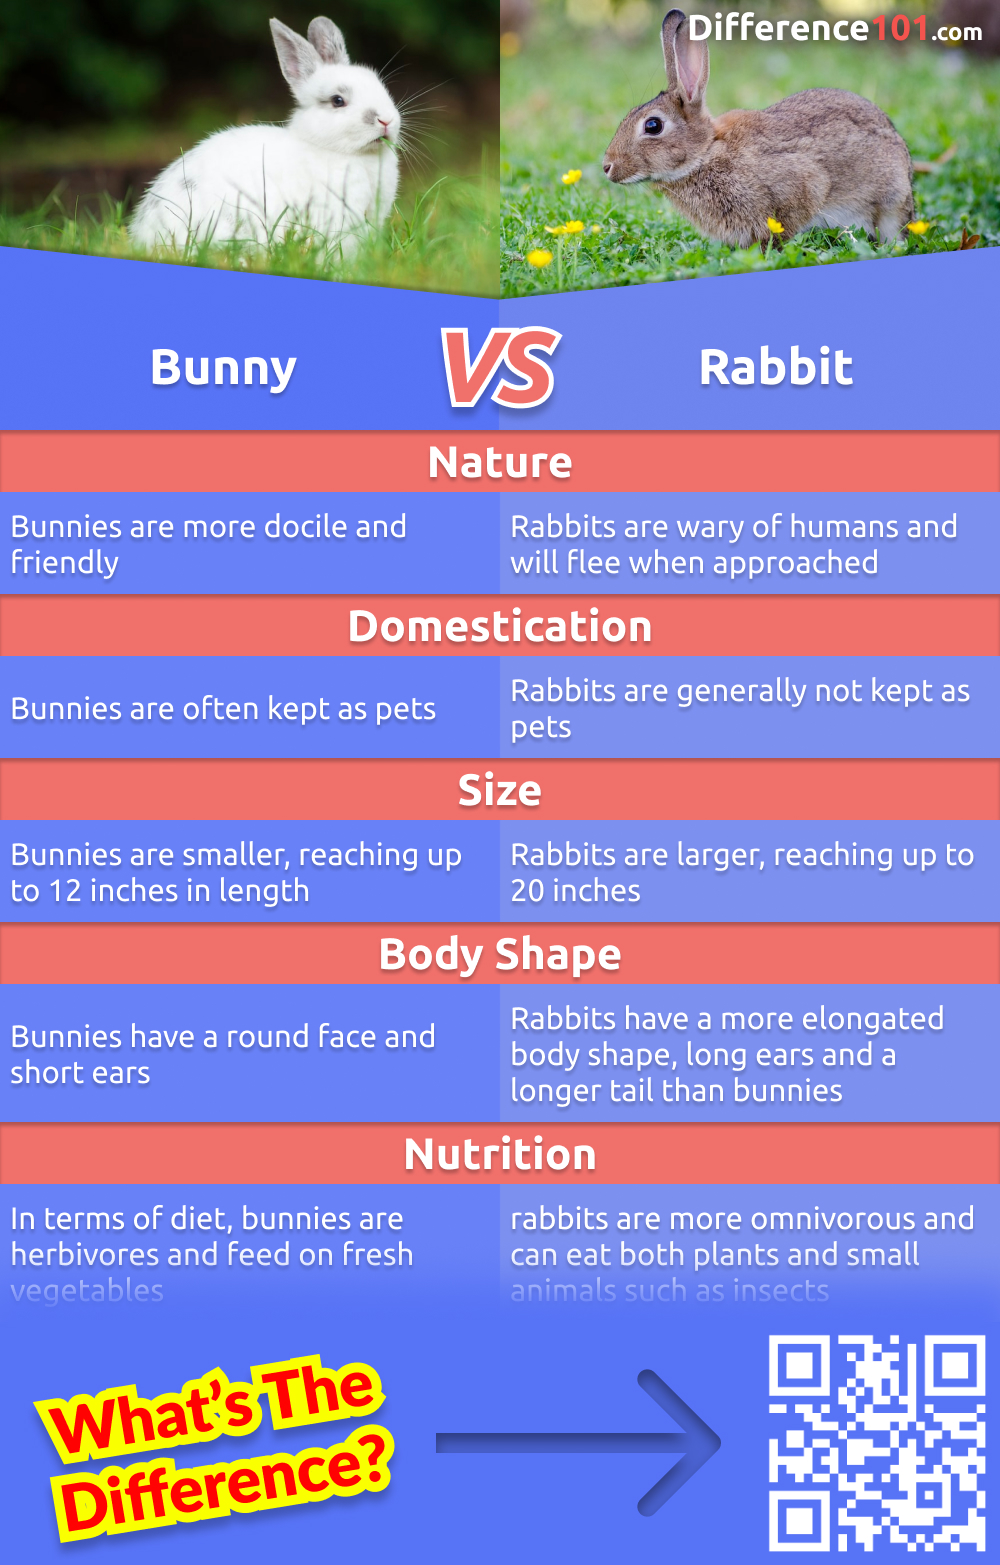 We all know that bunnies and rabbits are two different animals, but what are the differences between them? In this article, we'll compare the two and discuss the pros and cons of each. Read more here.